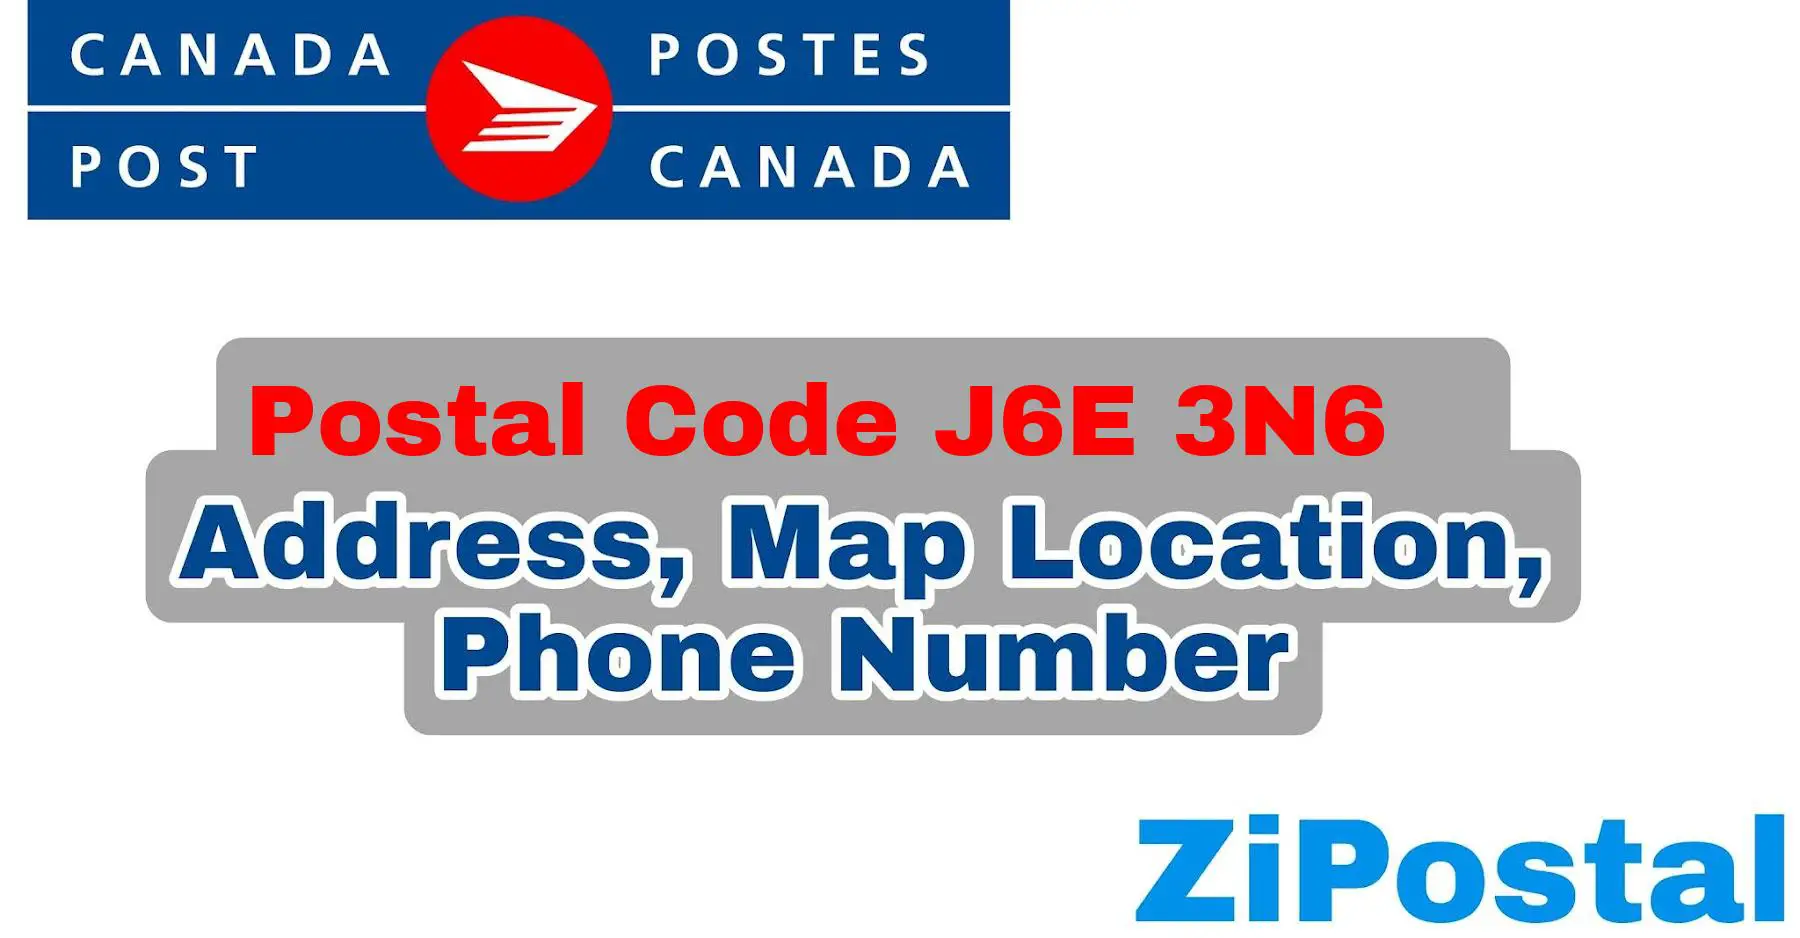 Postal Code J6E 3N6 Address Map Location and Phone Number